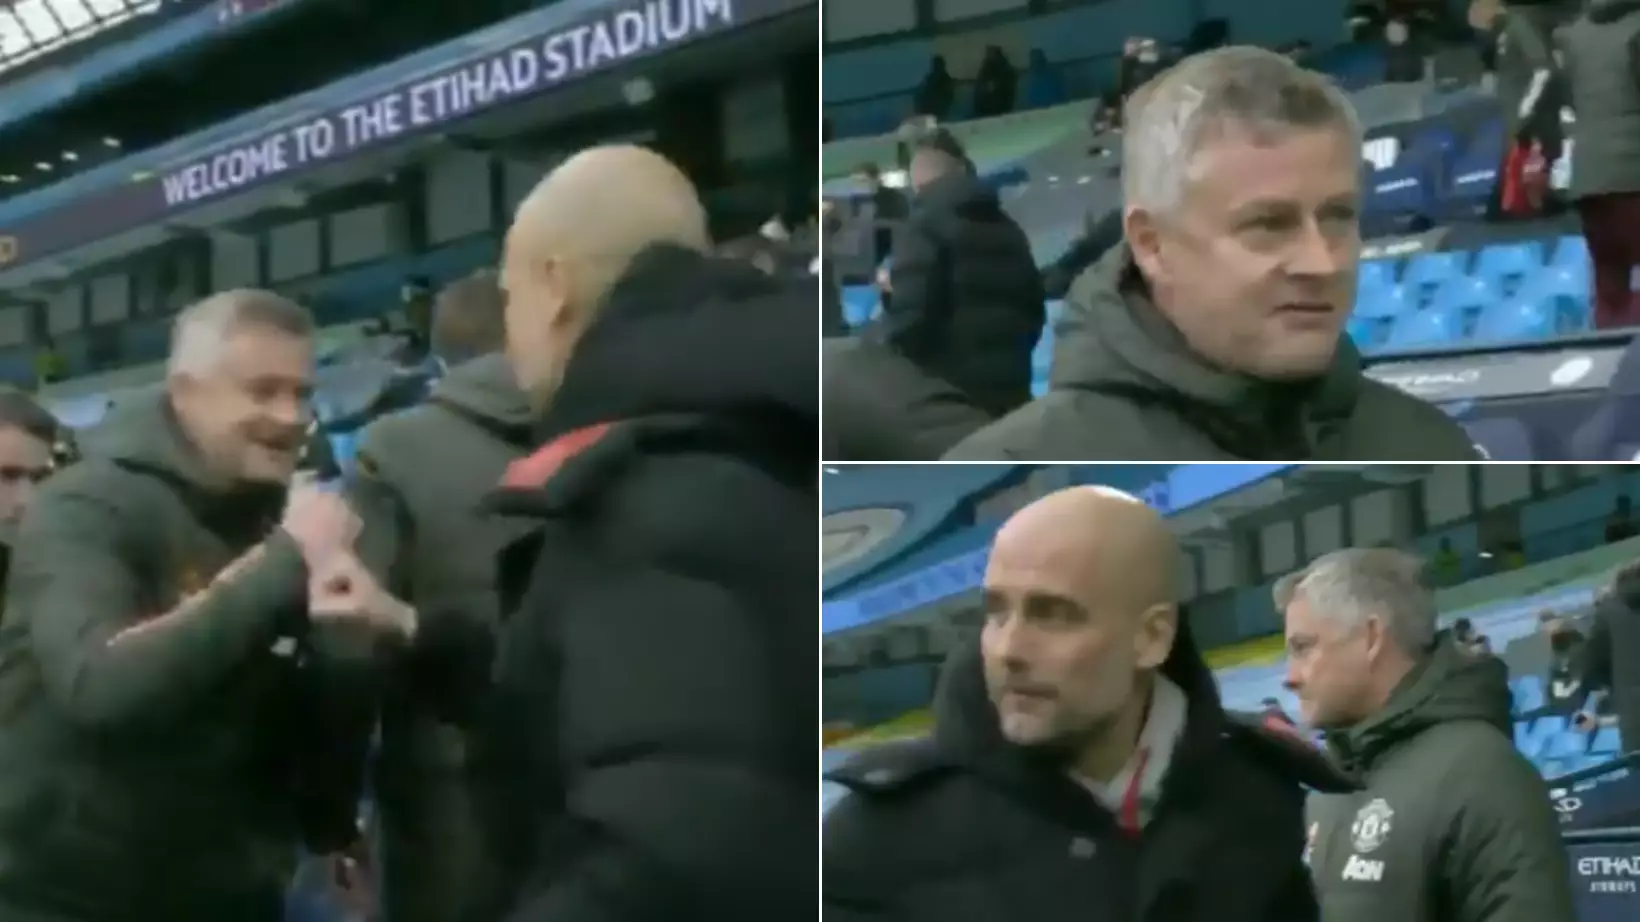 Ole Gunnar Solskjaer's Facial Expression Immediately Change After Greeting Pep Guardiola